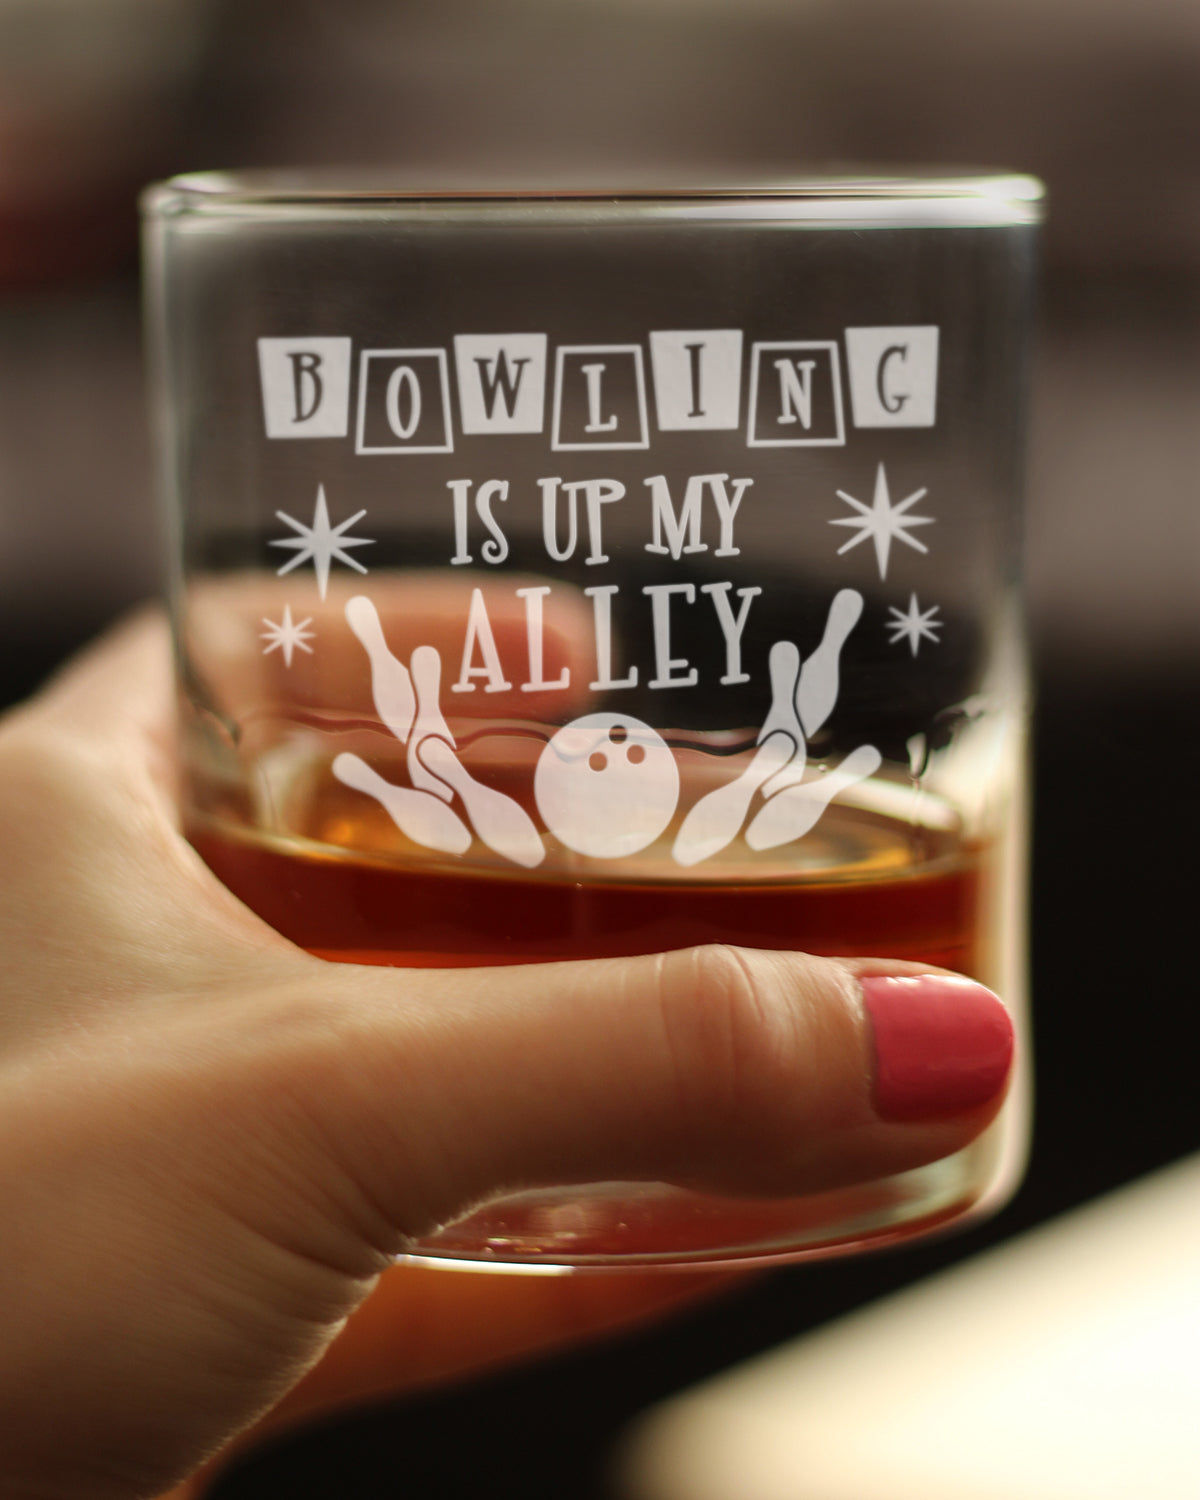 Bowling Alley Is Up My Alley - Whiskey Rocks Glass - Funny Bowling Themed Gifts and Decor for Bowlers - 10.25 Oz Glass